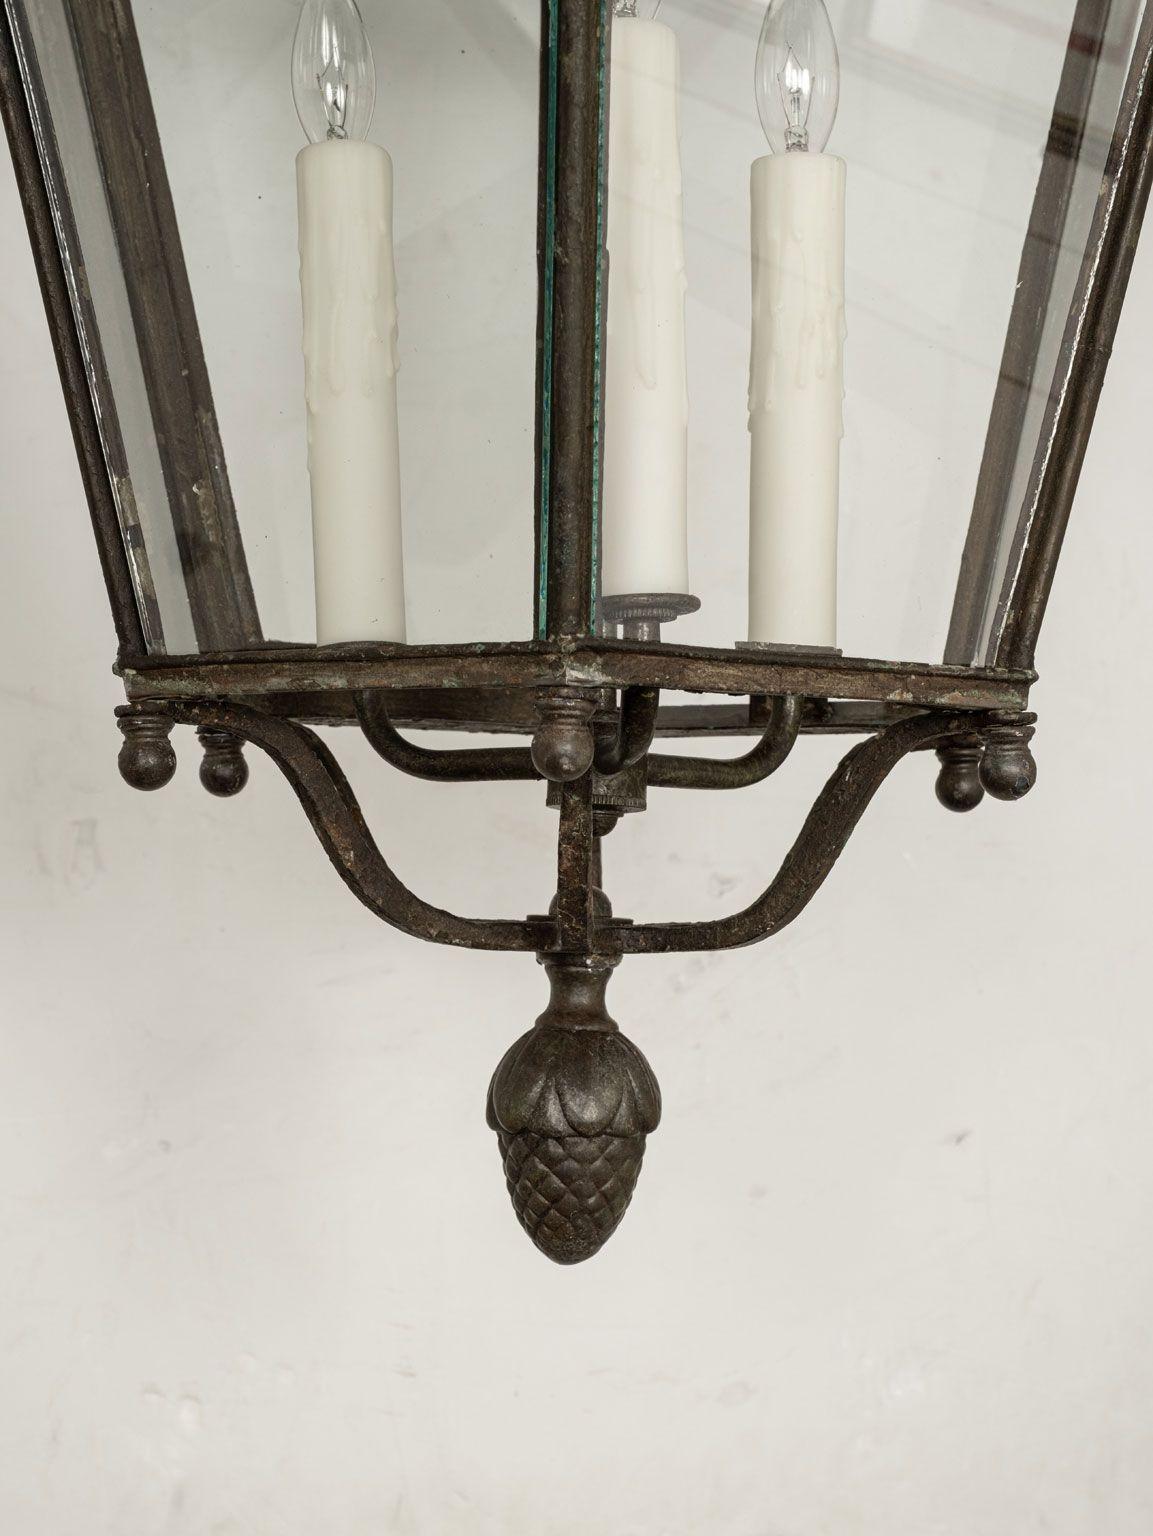 19th century French lantern in tole, iron and glass. Repousse decoration. Circa 1860-1899. Newly wired with a three candelabra socket drop-cluster. Includes chain and a canopy (listed height does not include chain).

Note: Original/early finish on